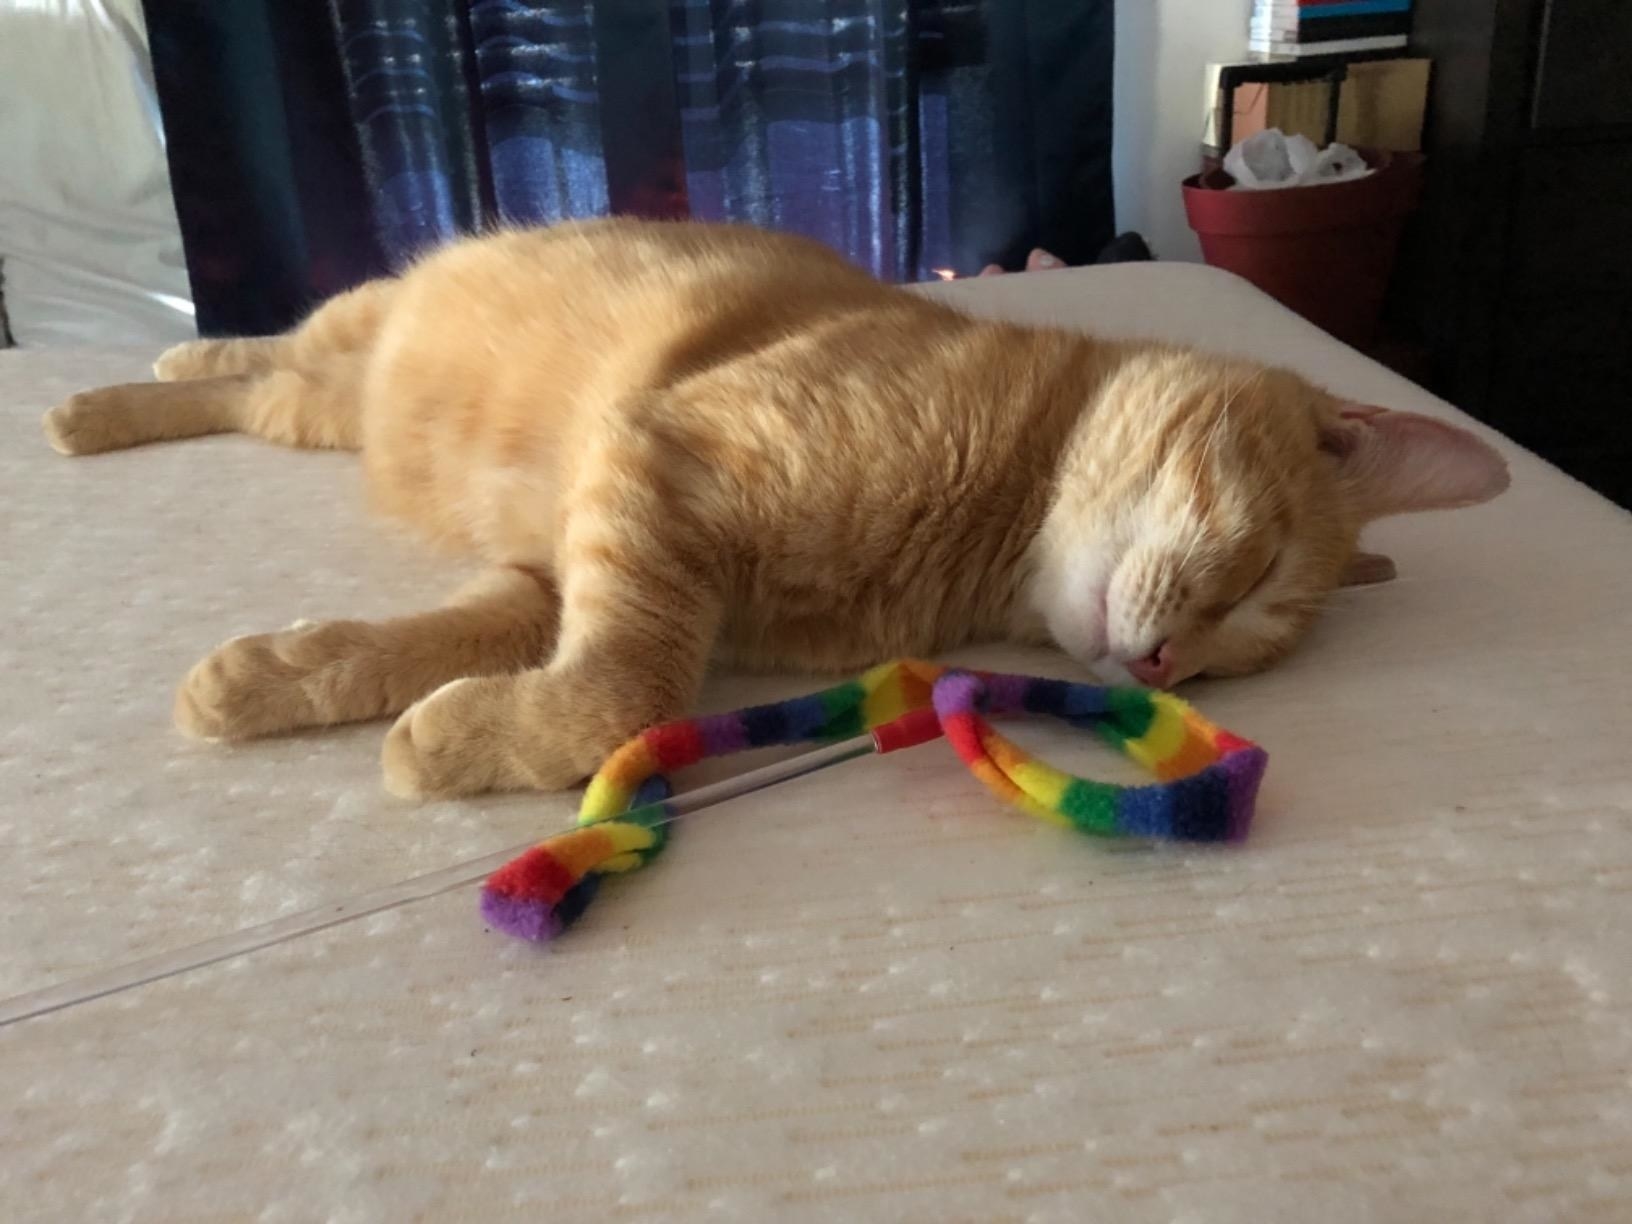 Reviewer image of orange cat snuggling with rainbow felt toy